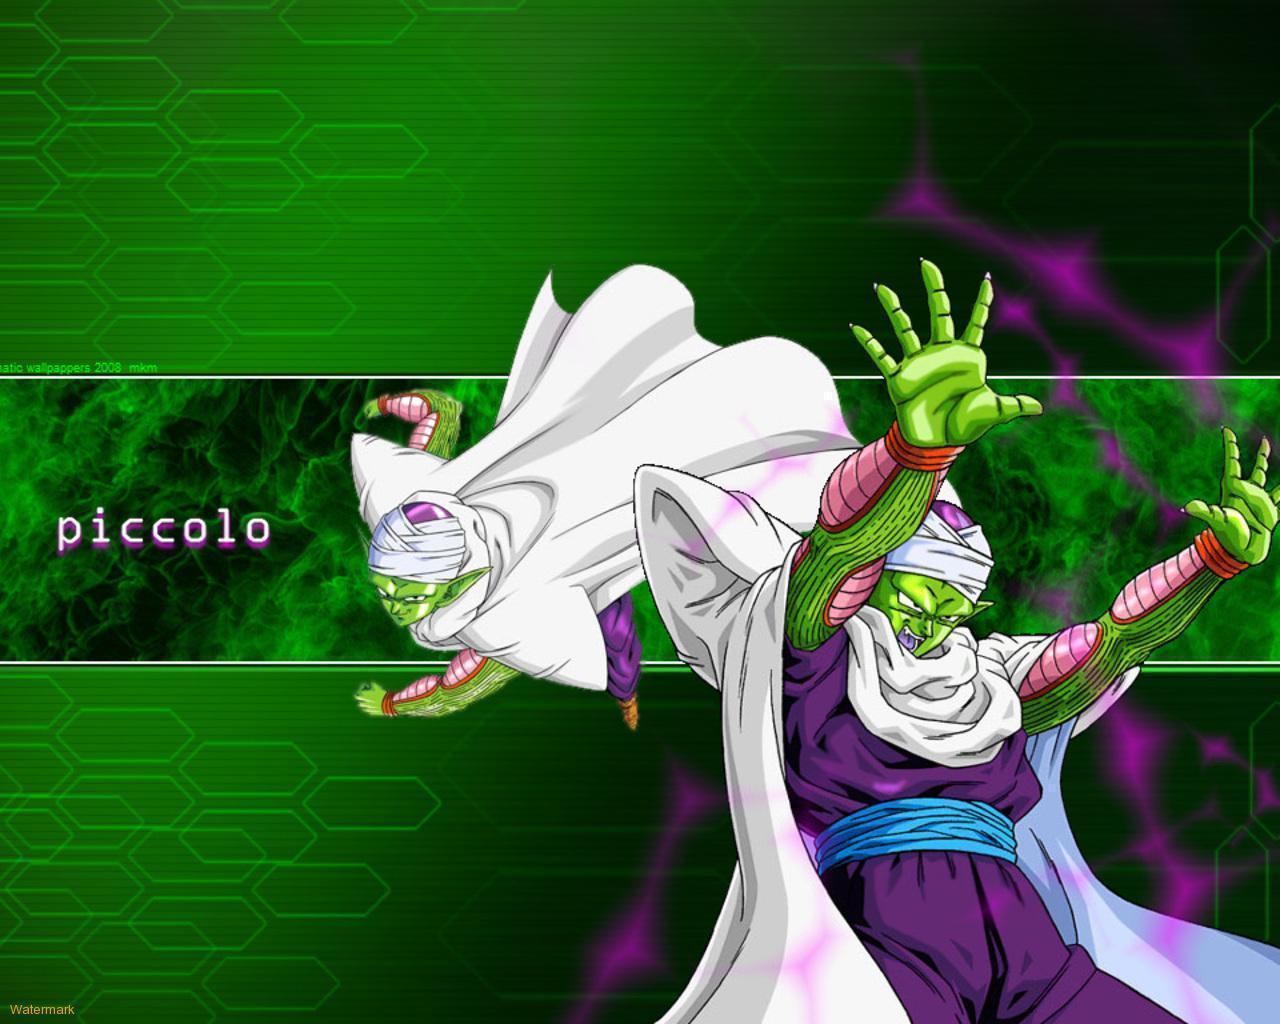 Piccolo Wallpapers Wallpaper Cave Images, Photos, Reviews